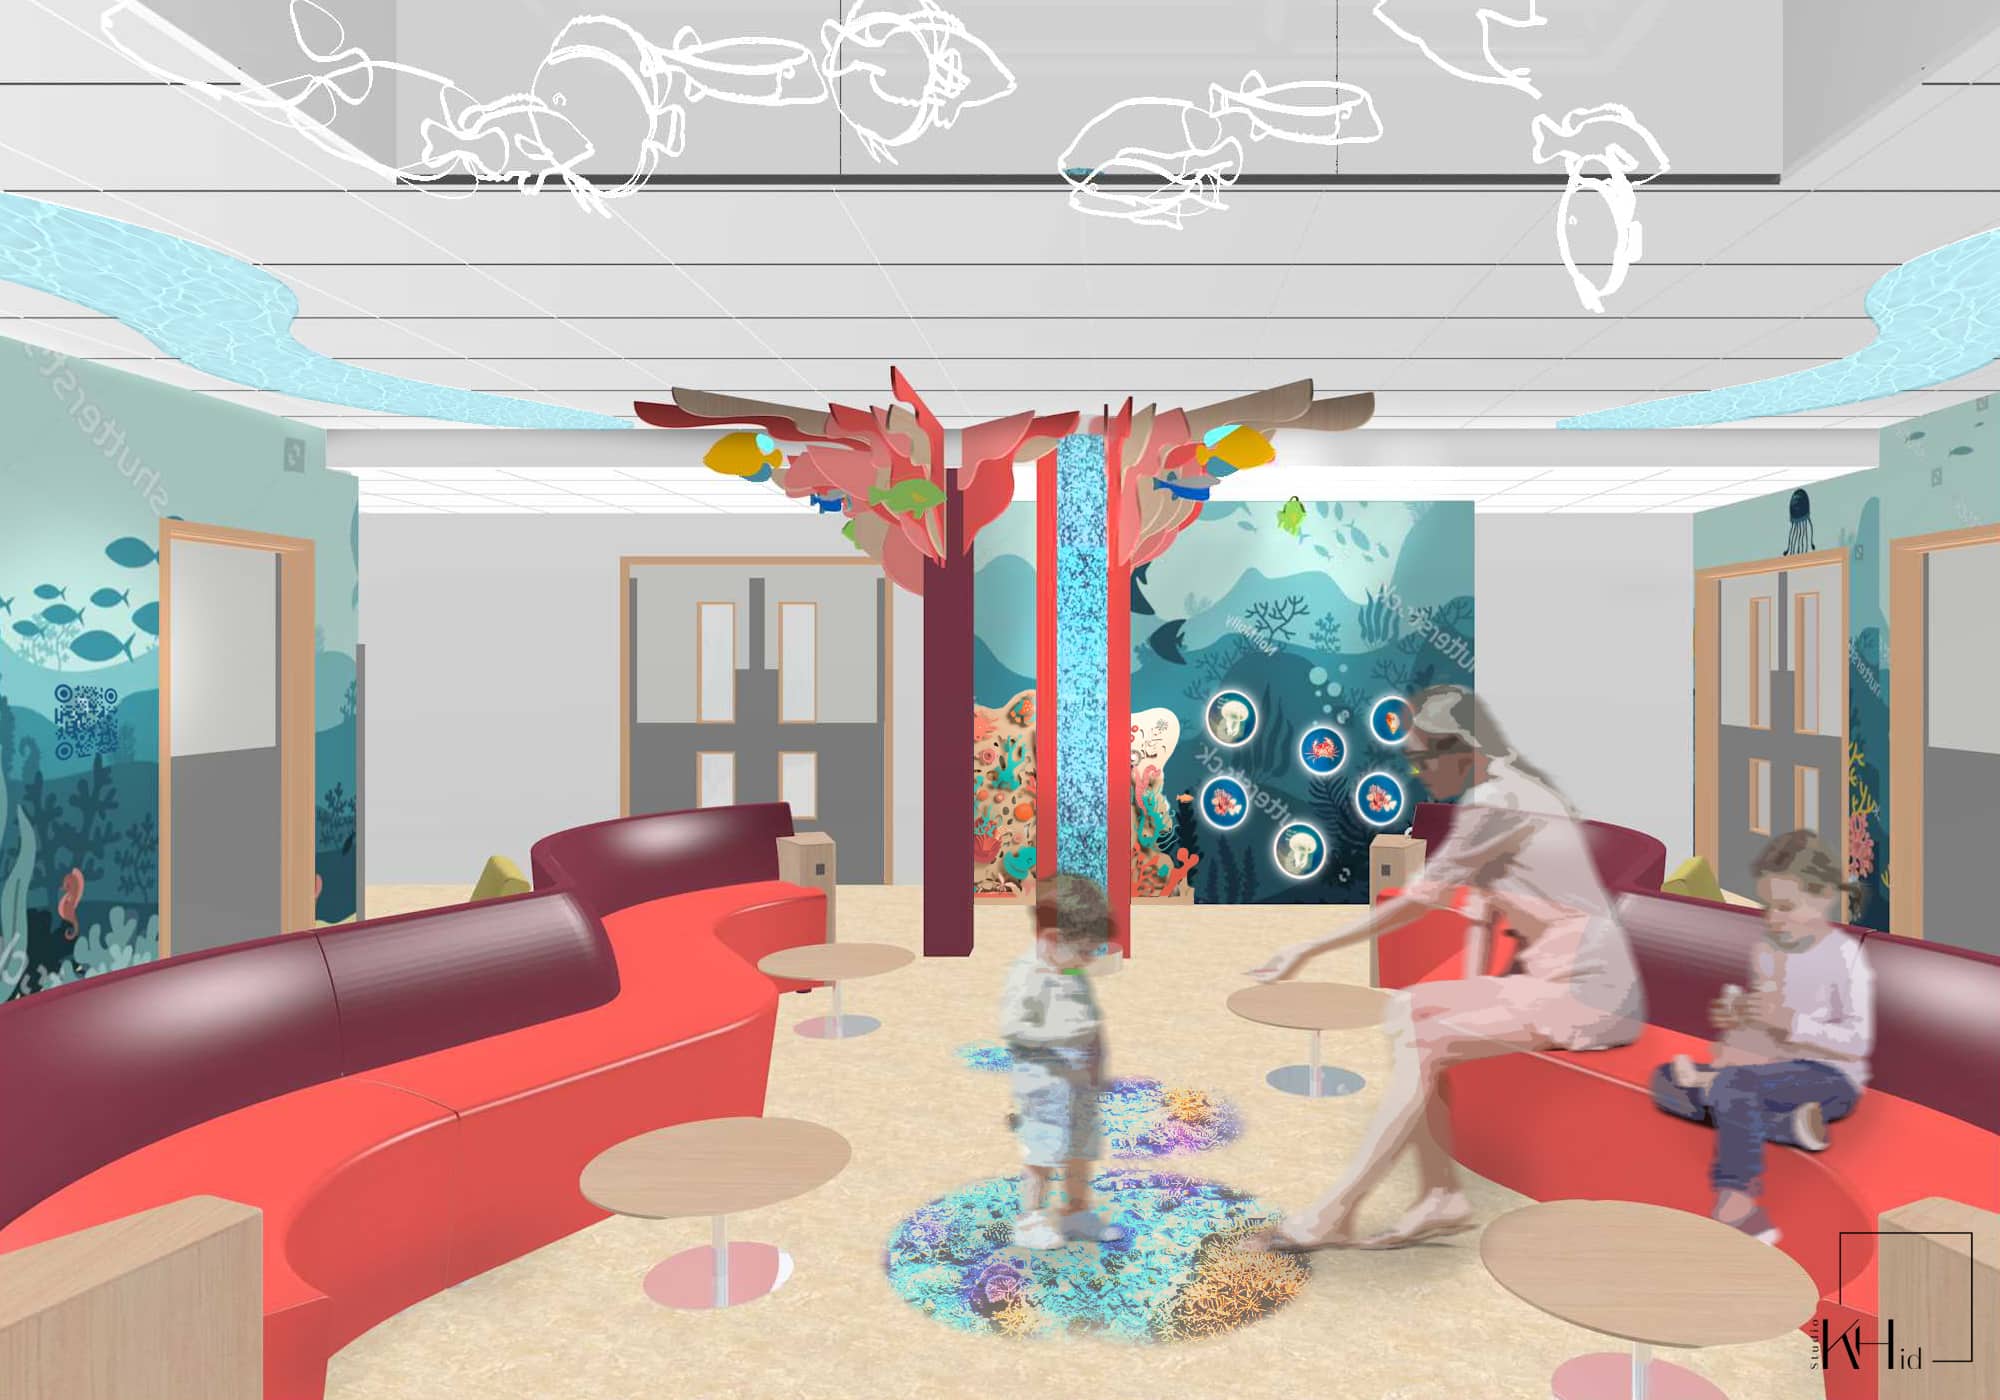 An artist impression of the new children's ED area